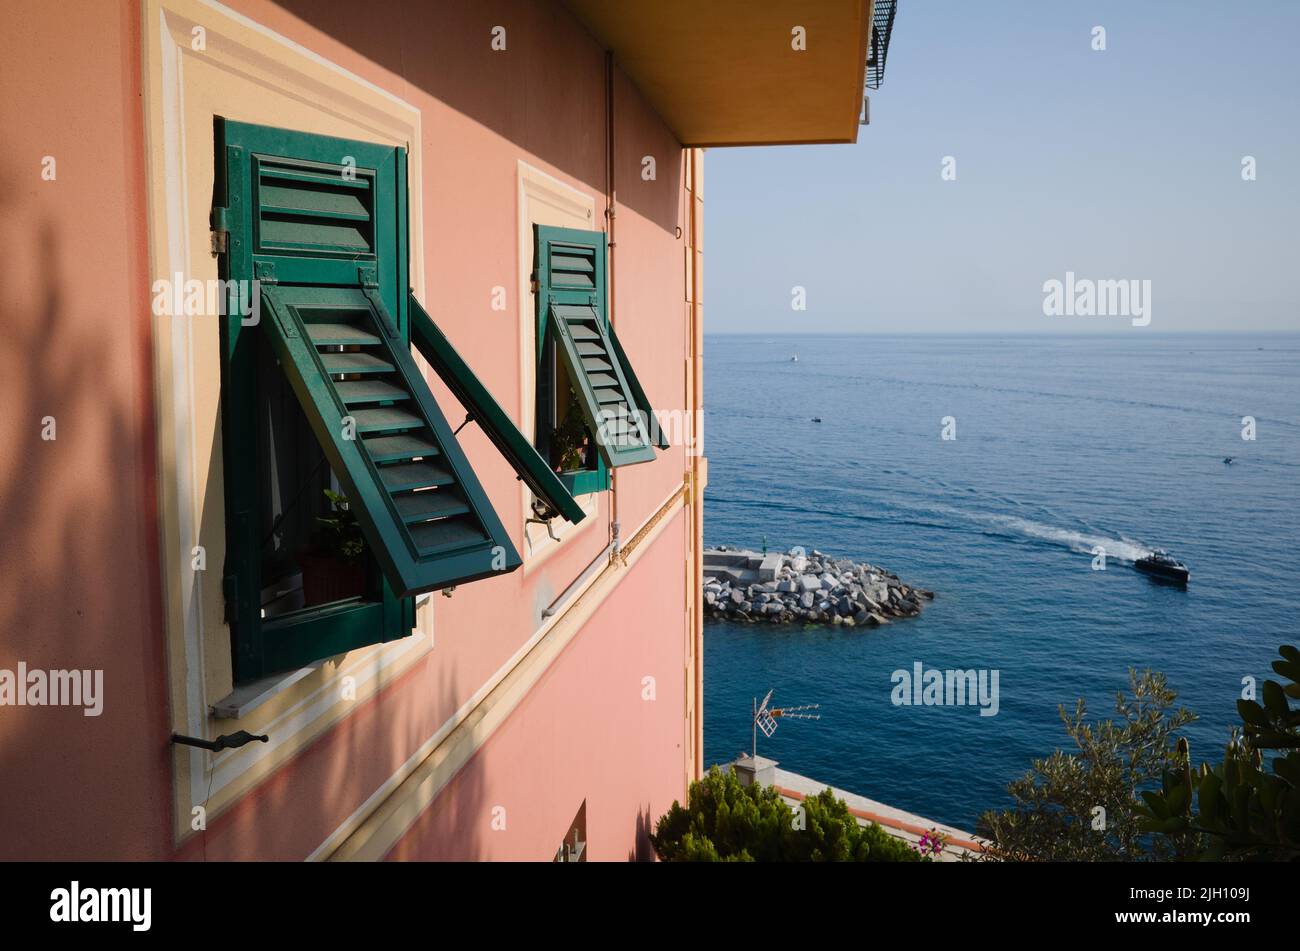 Pink building facade with green shutters on windows in typical Italian style. Traditional italian house on Mediterranean shore, Camogli, Liguria Stock Photo